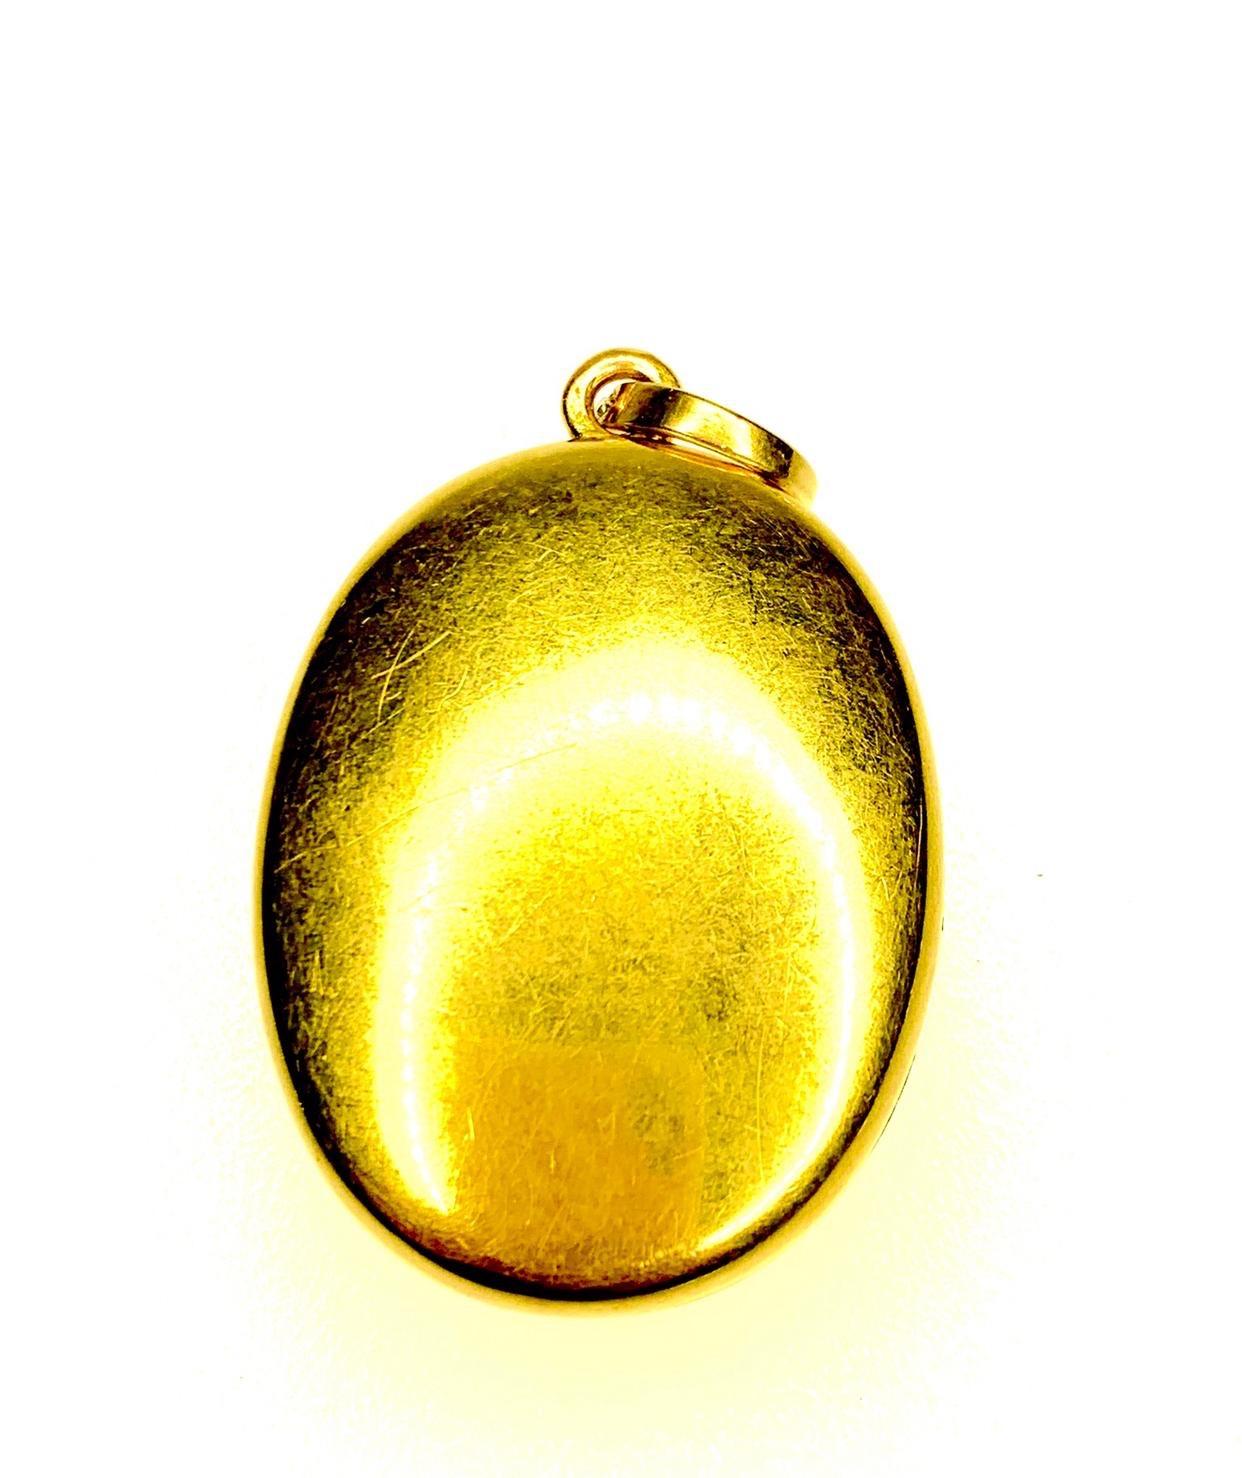 A victorian gold 18k locket pendant with 28 sapphires and old mine cut Diamonds approx 1,6 ct  circa 1880s, opens tohost a picture or other items, see image attached. The weight is 29,4gr., Length 4cm and width 3,2cm. 